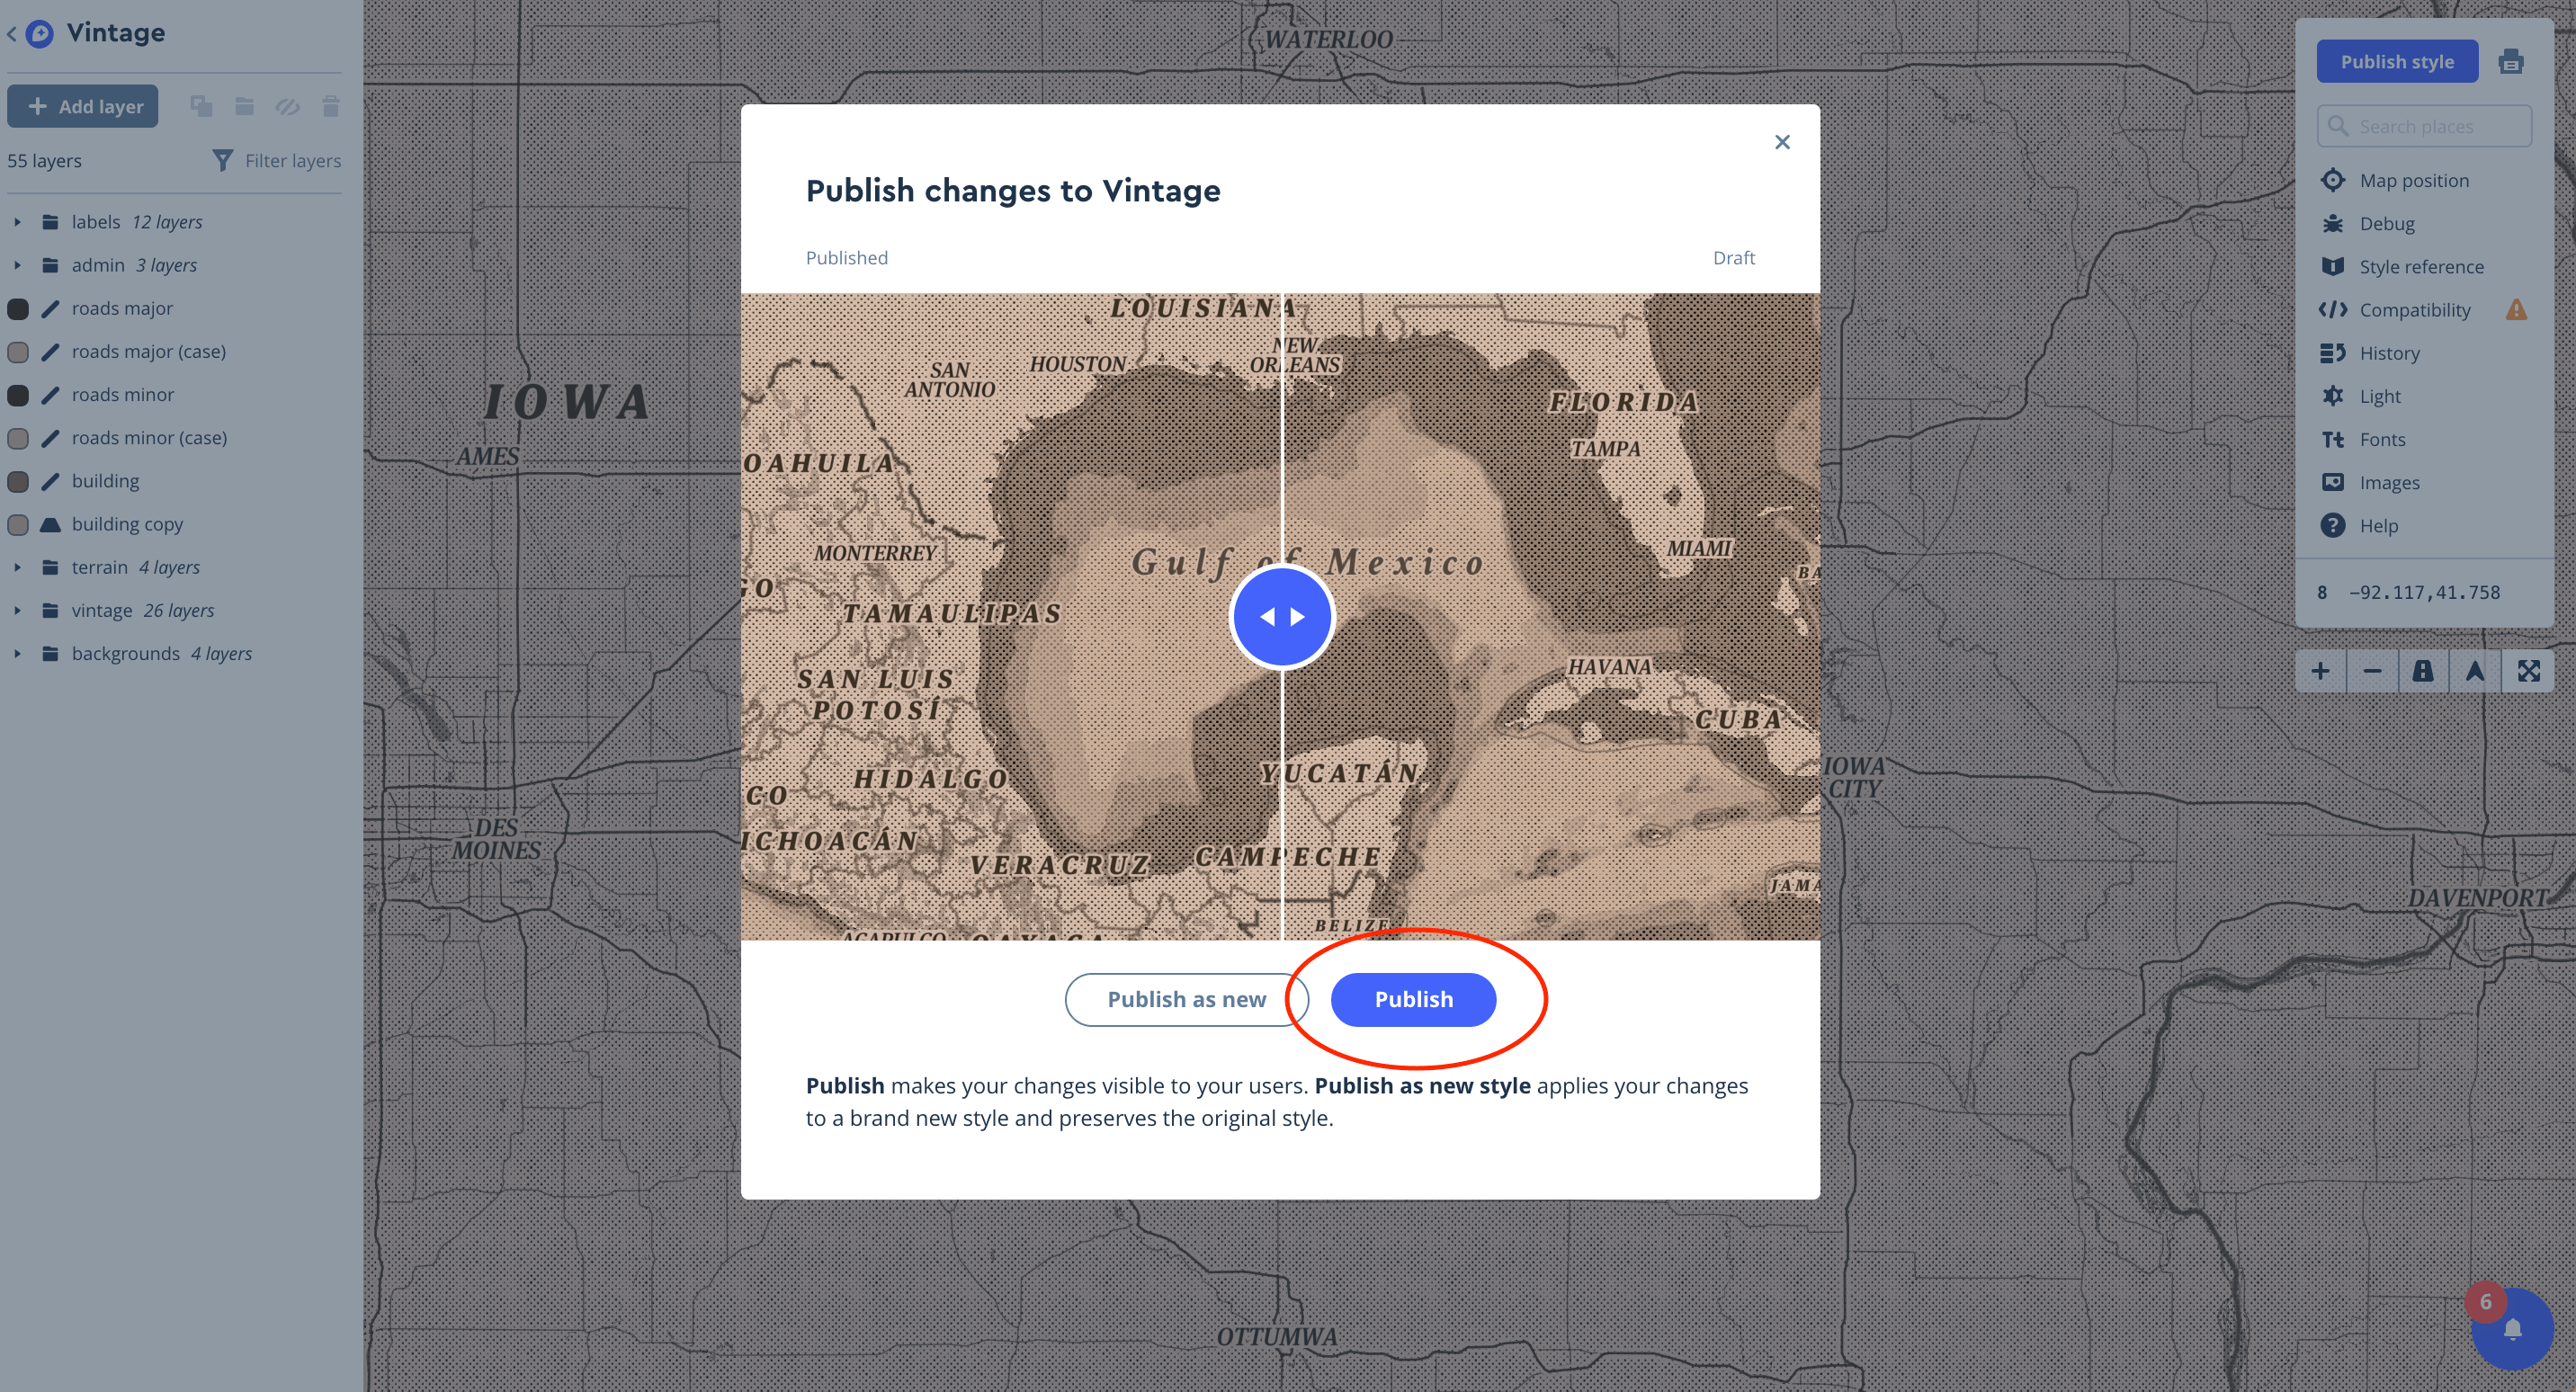 mapbox popup that asks whether to publish this style